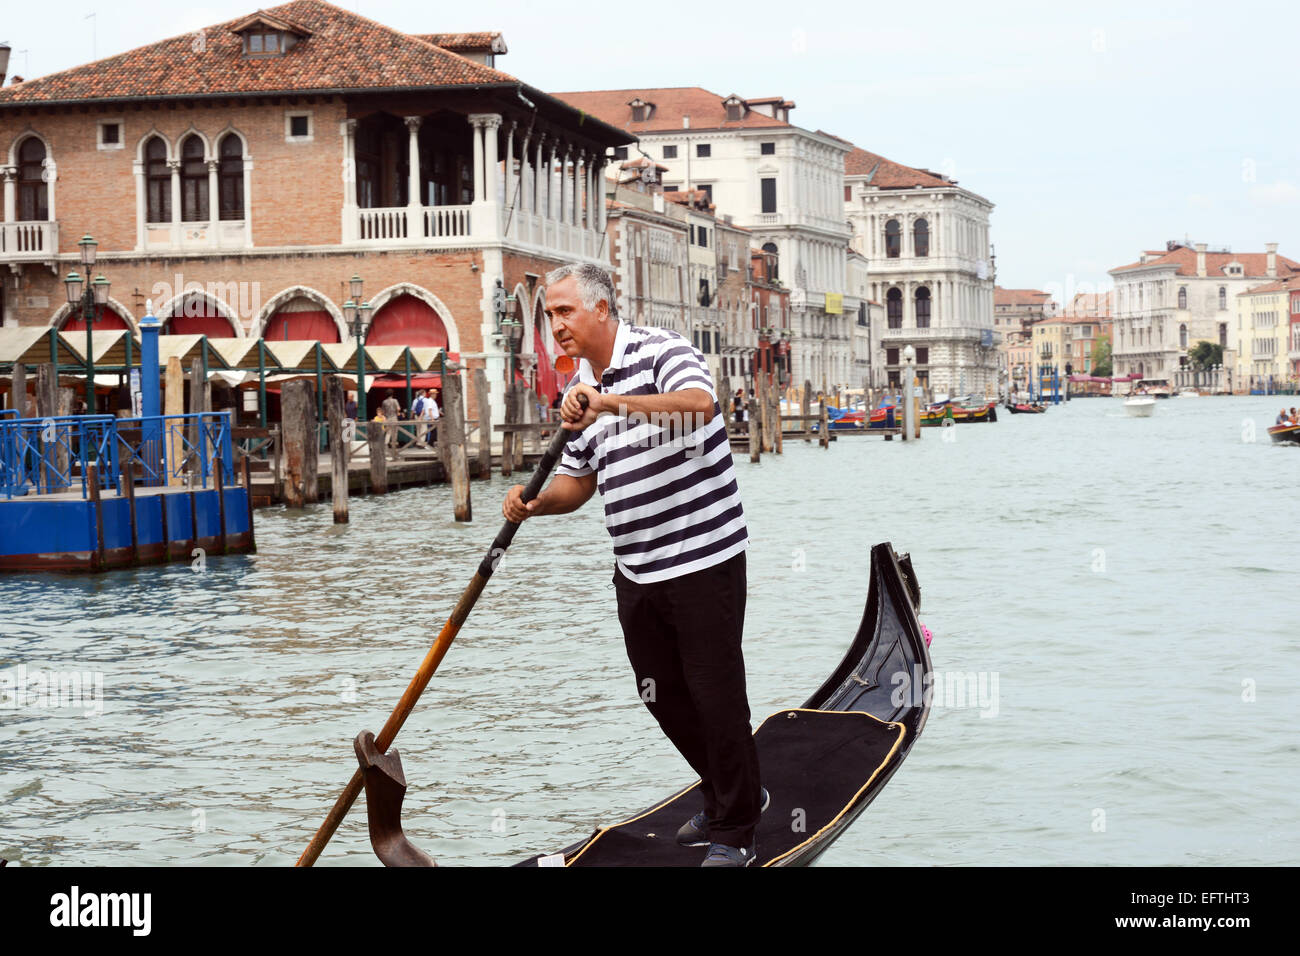 Gondolas transport tourists up and down the Grand Canal, Venice Italy. Stock Photo